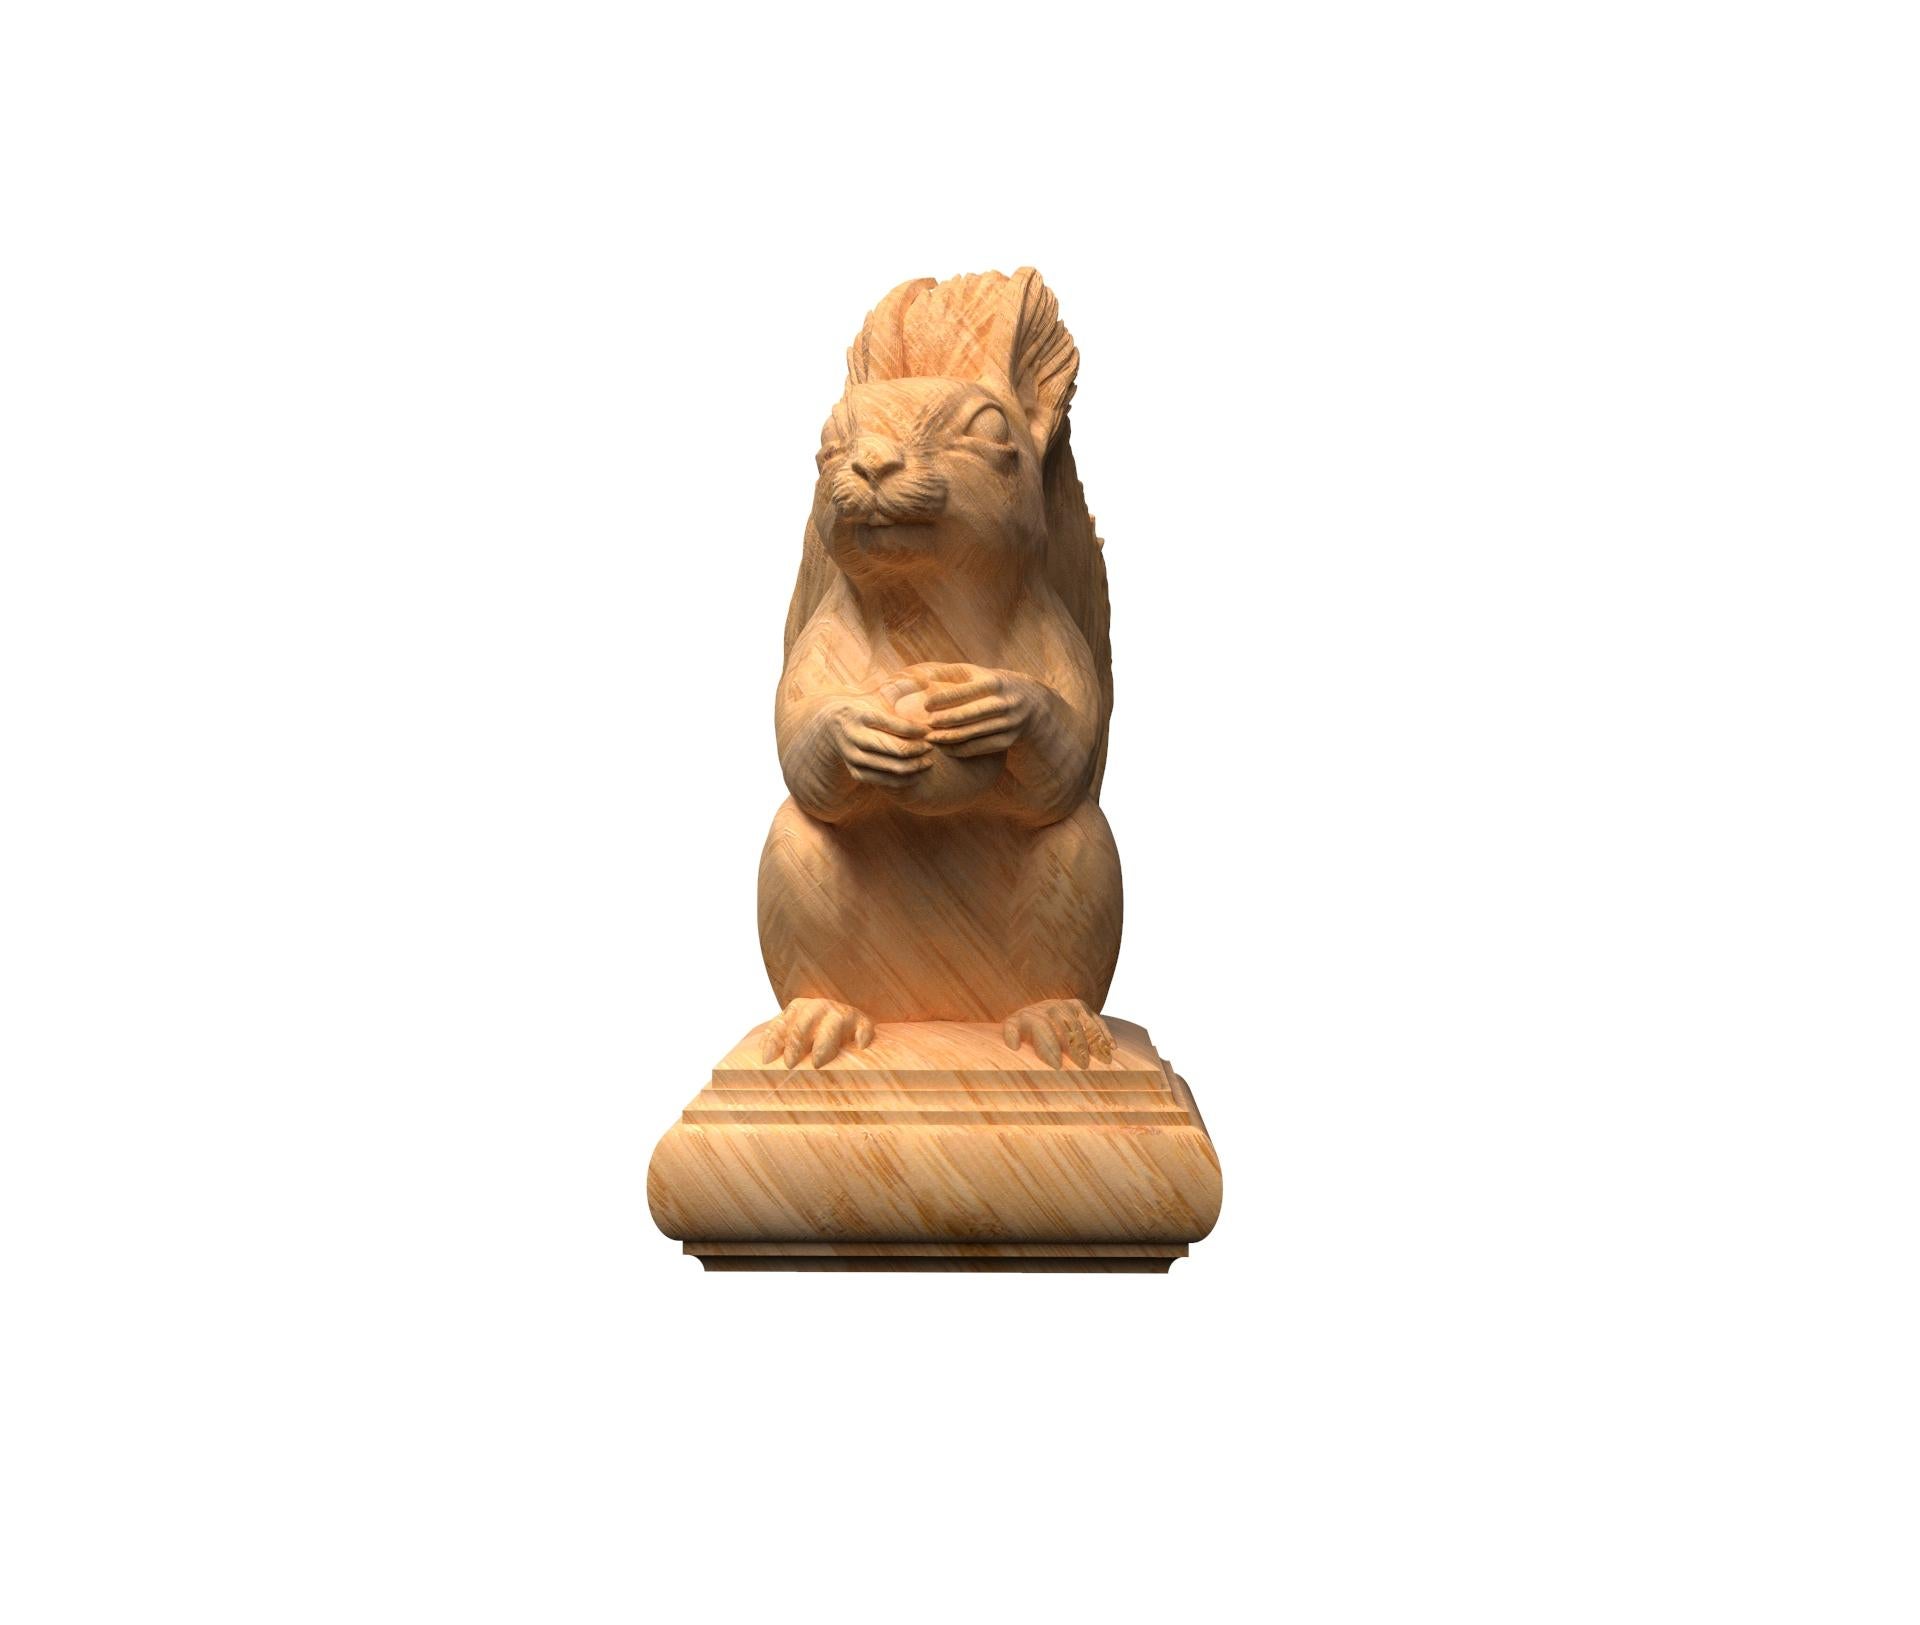 Wooden Carved Squirrel Finial. Handcrafted Stairs Decoration, Oak Newel Post Cap In New Condition For Sale In St Petersburg, St Petersburg